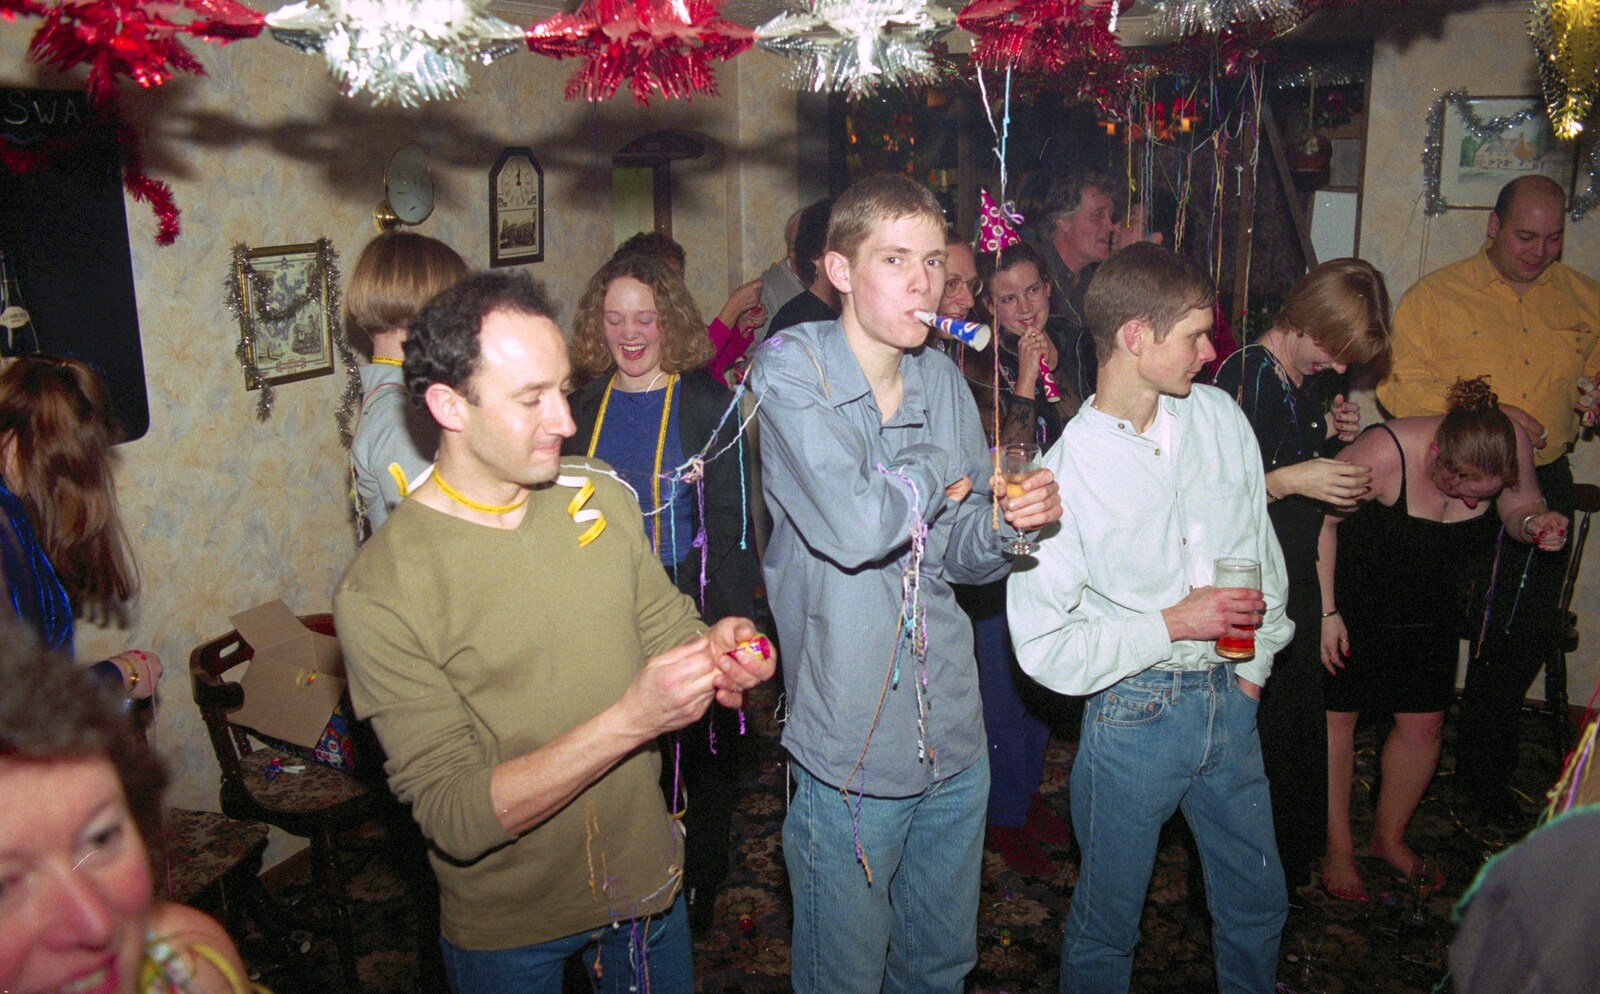 DH pulls a party popper as The Boy Phil blows a hooter from New Year's Eve at The Swan Inn, Brome, Suffolk - 31st December 1999